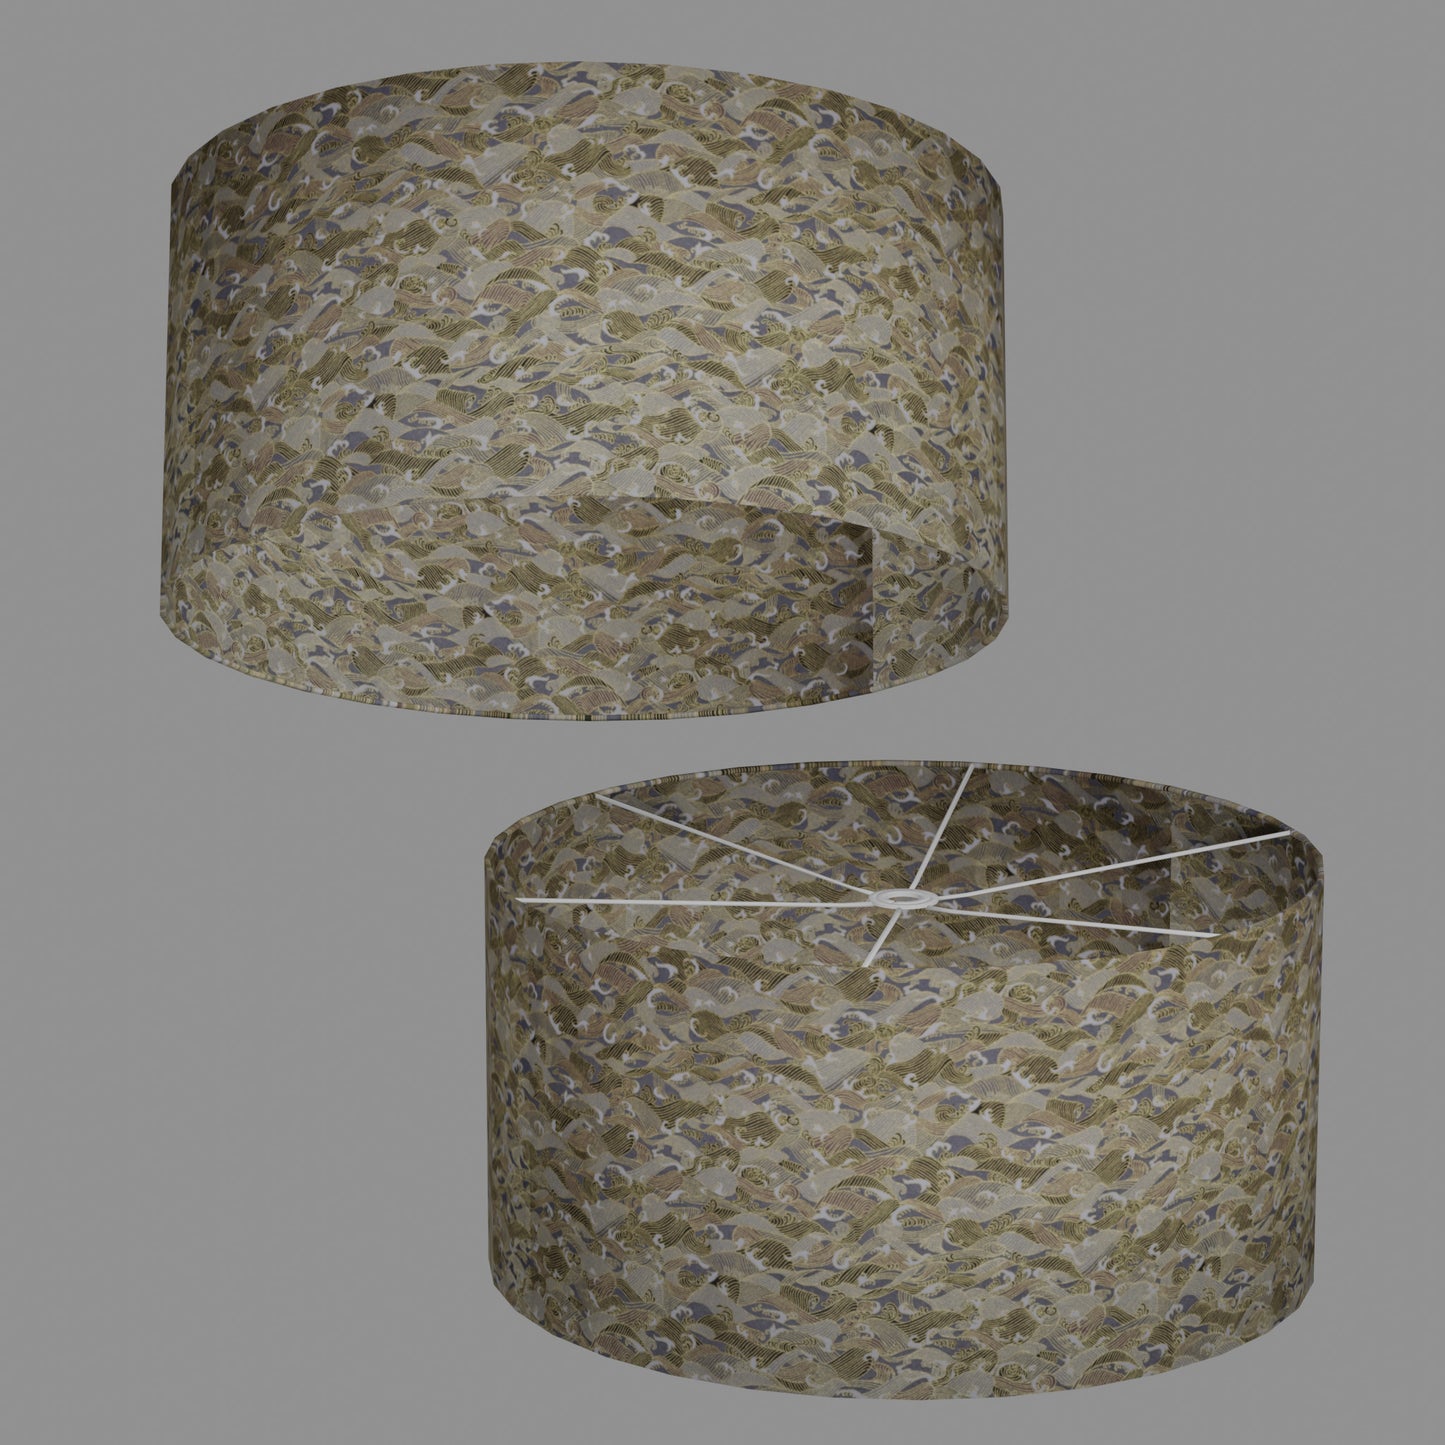 Drum Lamp Shade - W03 ~ Gold Waves on Greys, 60cm(d) x 30cm(h)